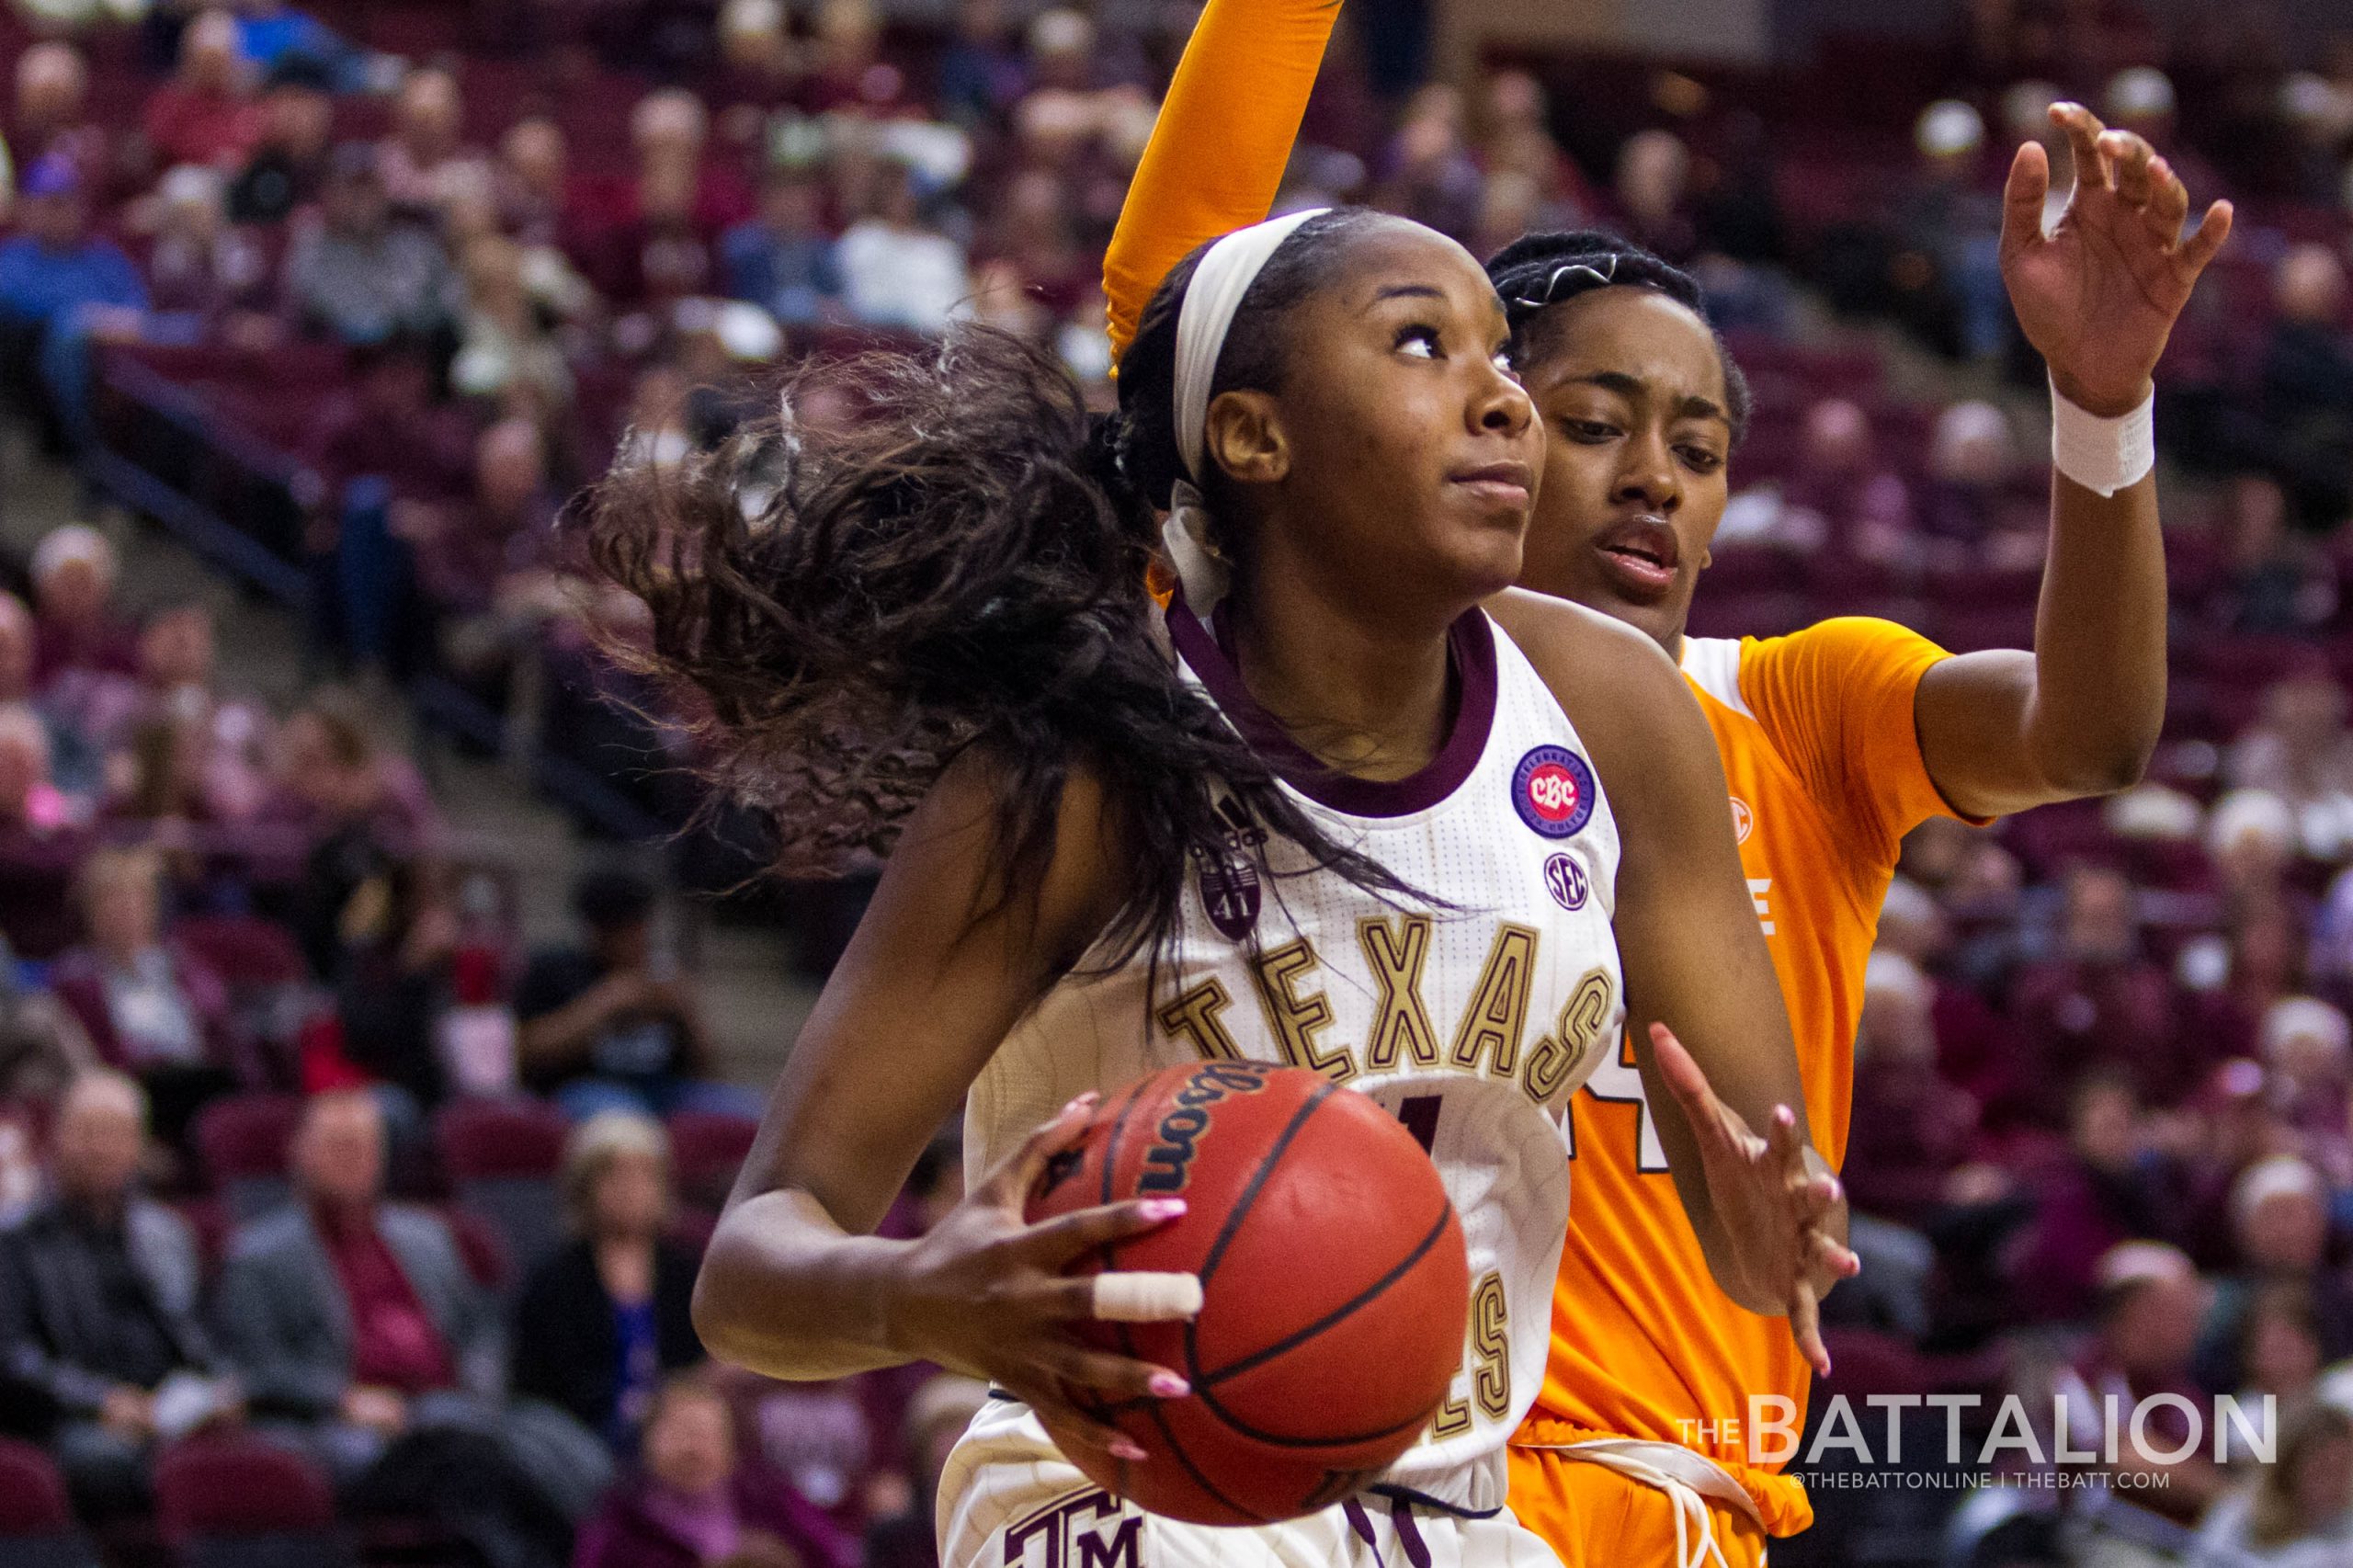 GALLERY%3A+Womens+Basketball+vs.+Tennessee